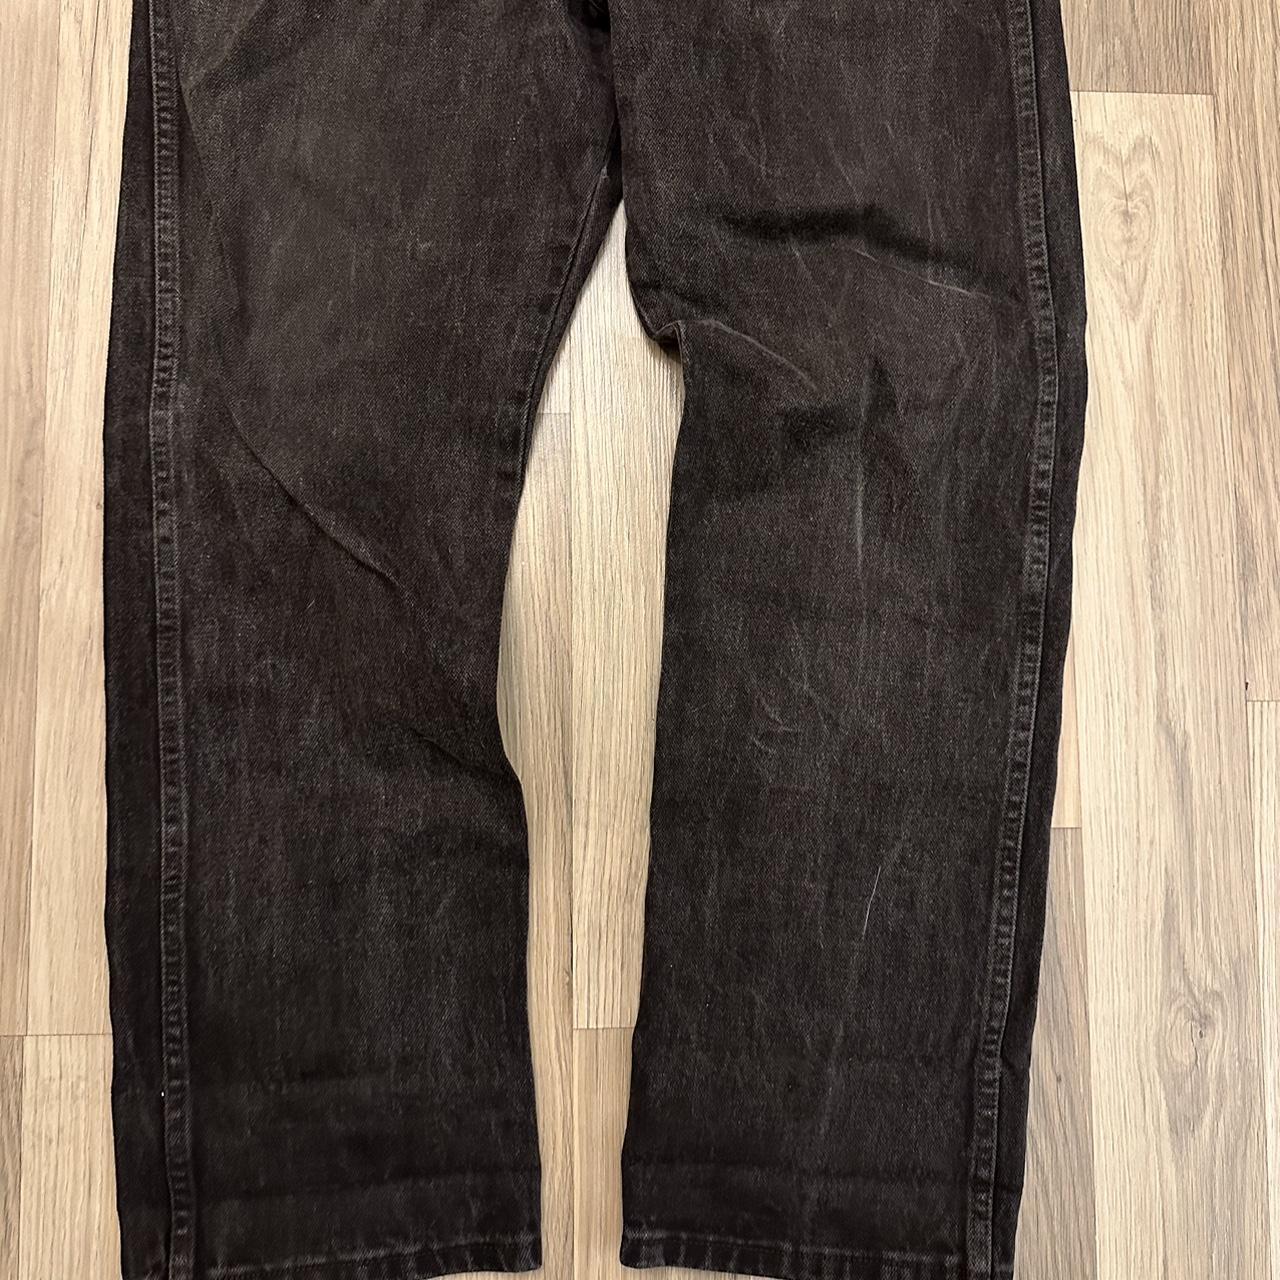 Vintage faded black wranglers Jeans are in good... - Depop